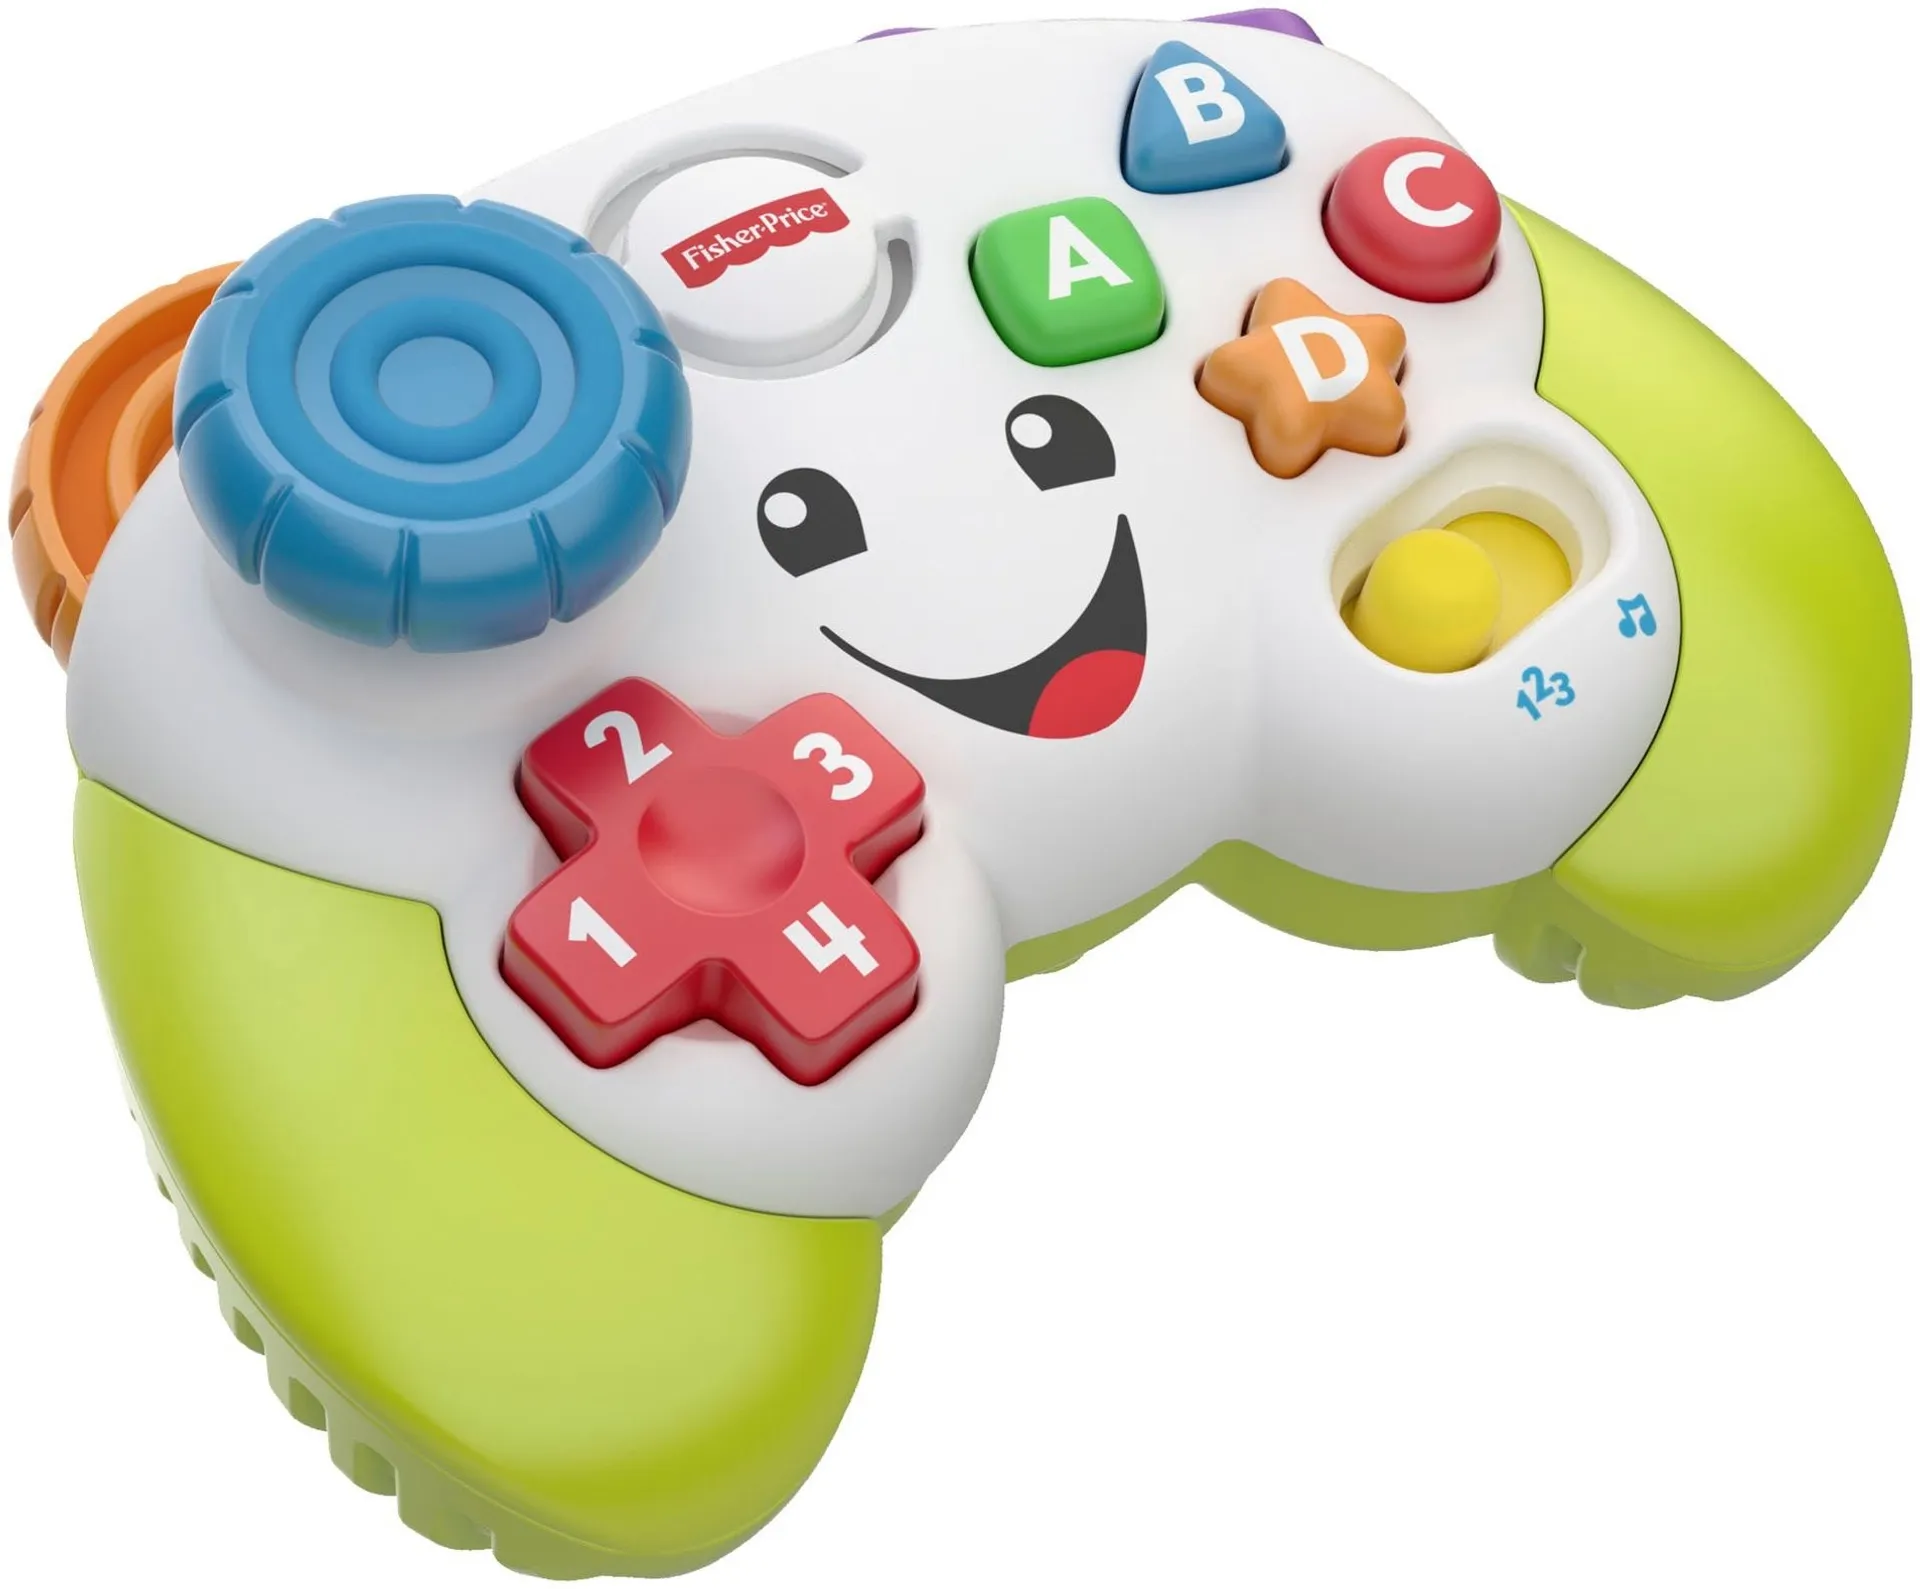 Fisher-Price Smart stages Game & Learn controller grh32 - 2